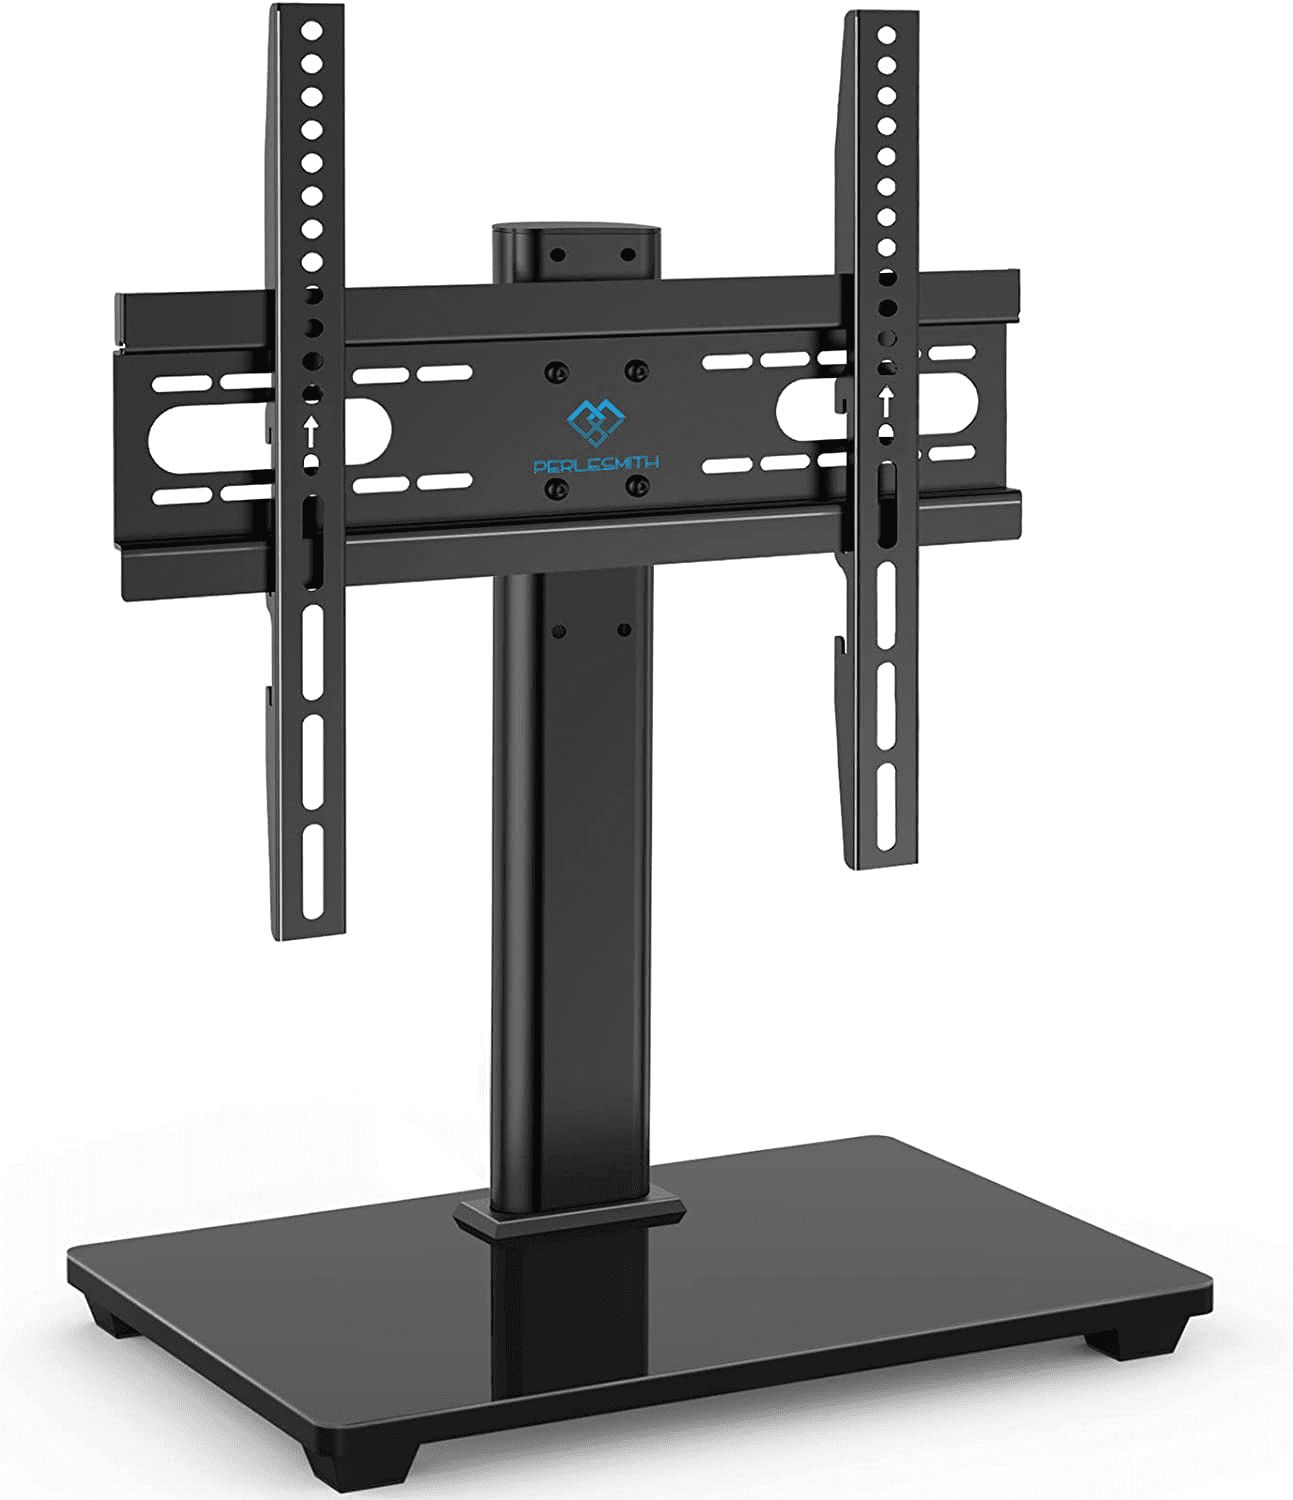 Universal Tabletop Tv Stand Base With Mount,for India | Ubuy Within Universal Tabletop Tv Stands (View 8 of 15)